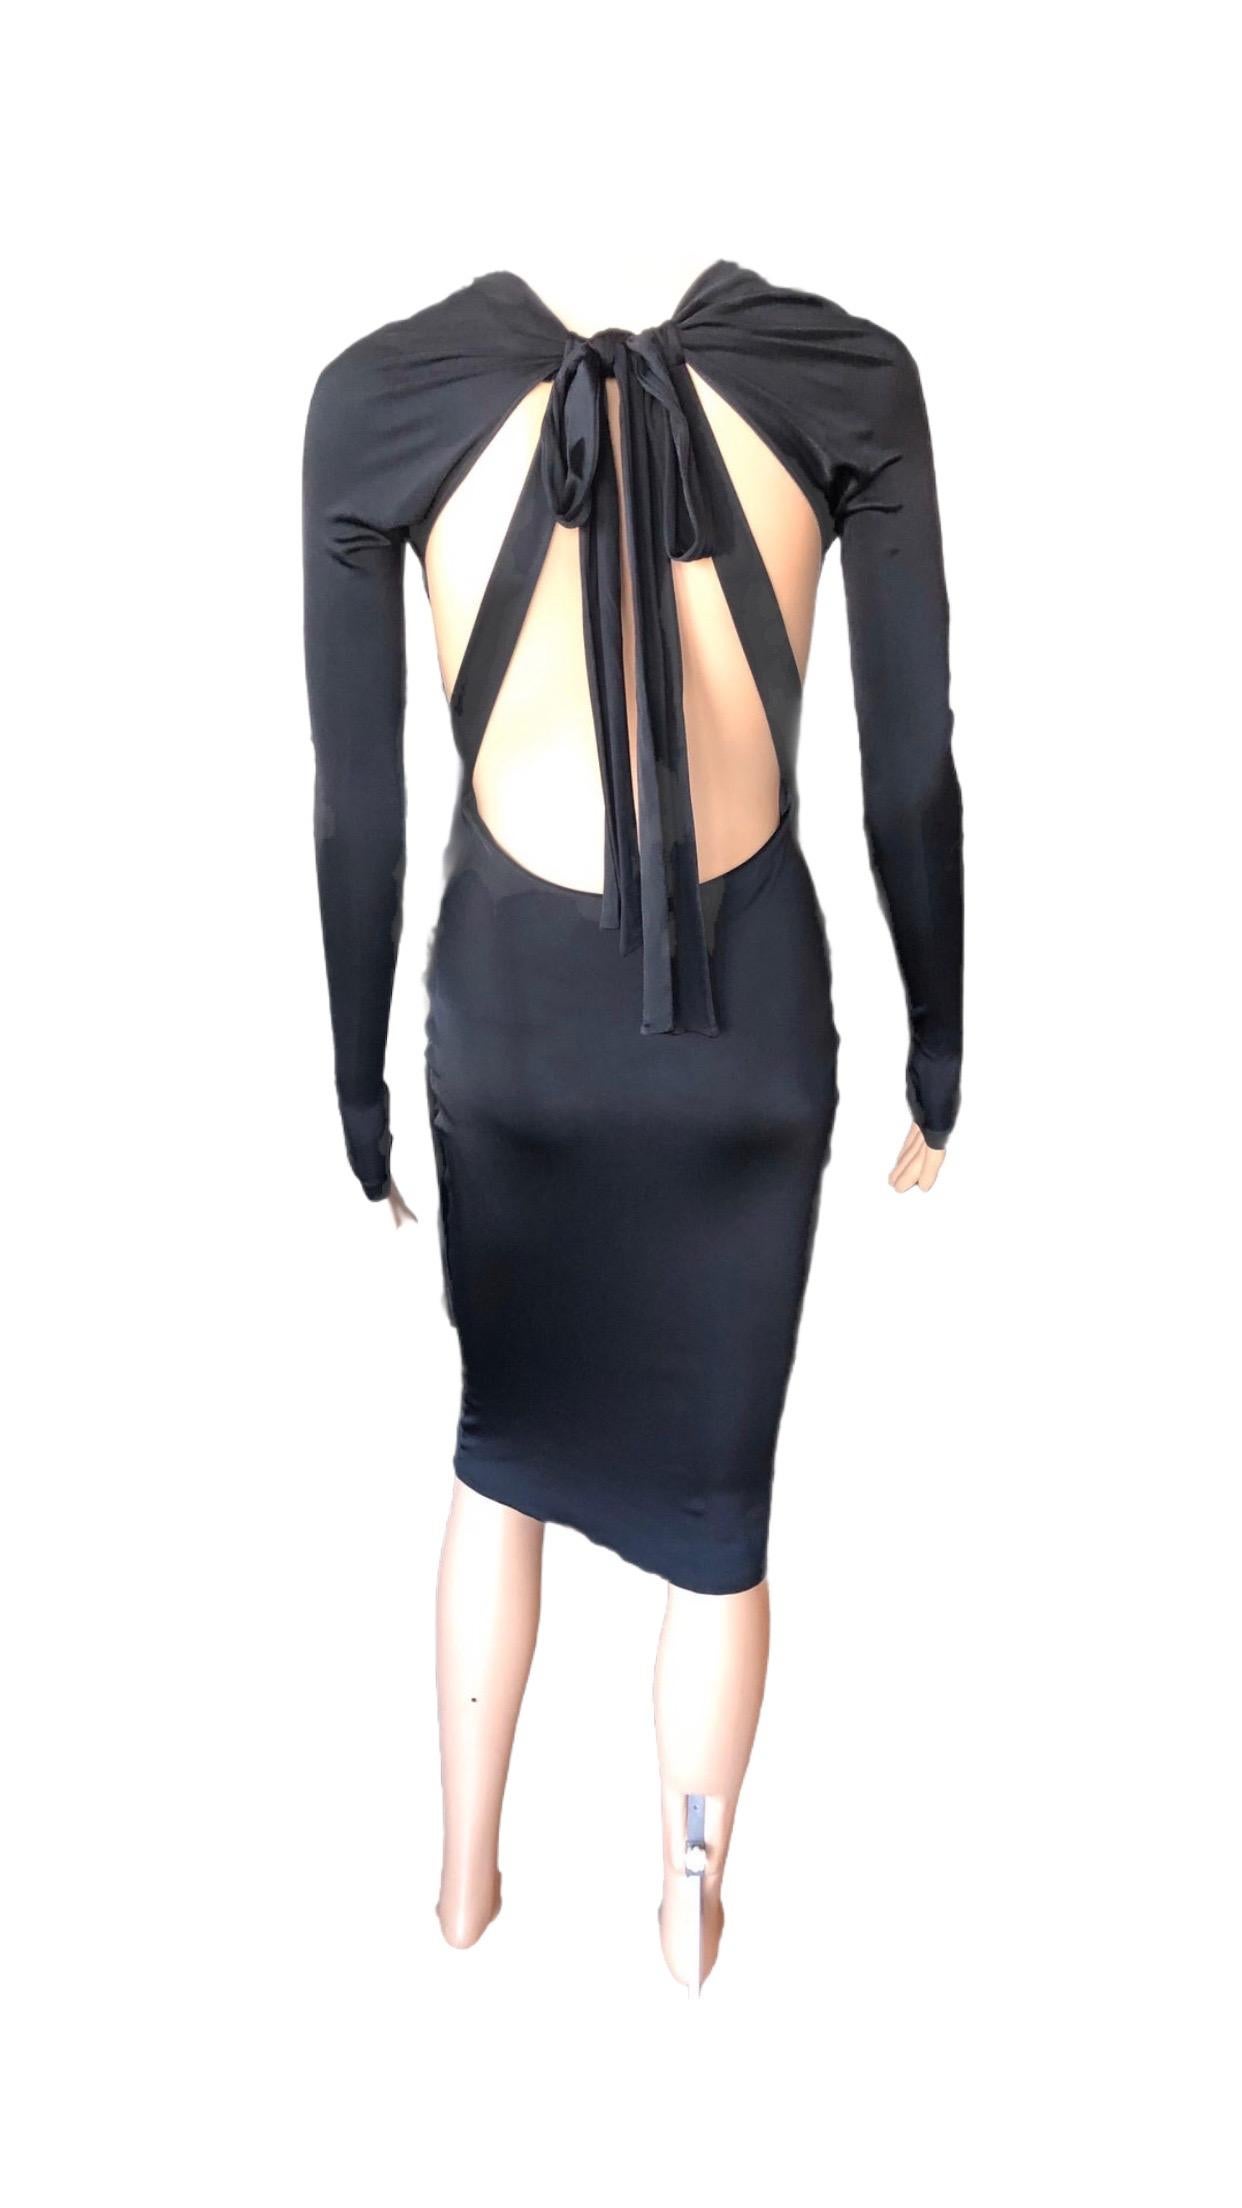 Gucci S/S 2005 Tom Ford Plunging Cutout Backless Bodycon Black Dress For Sale 9